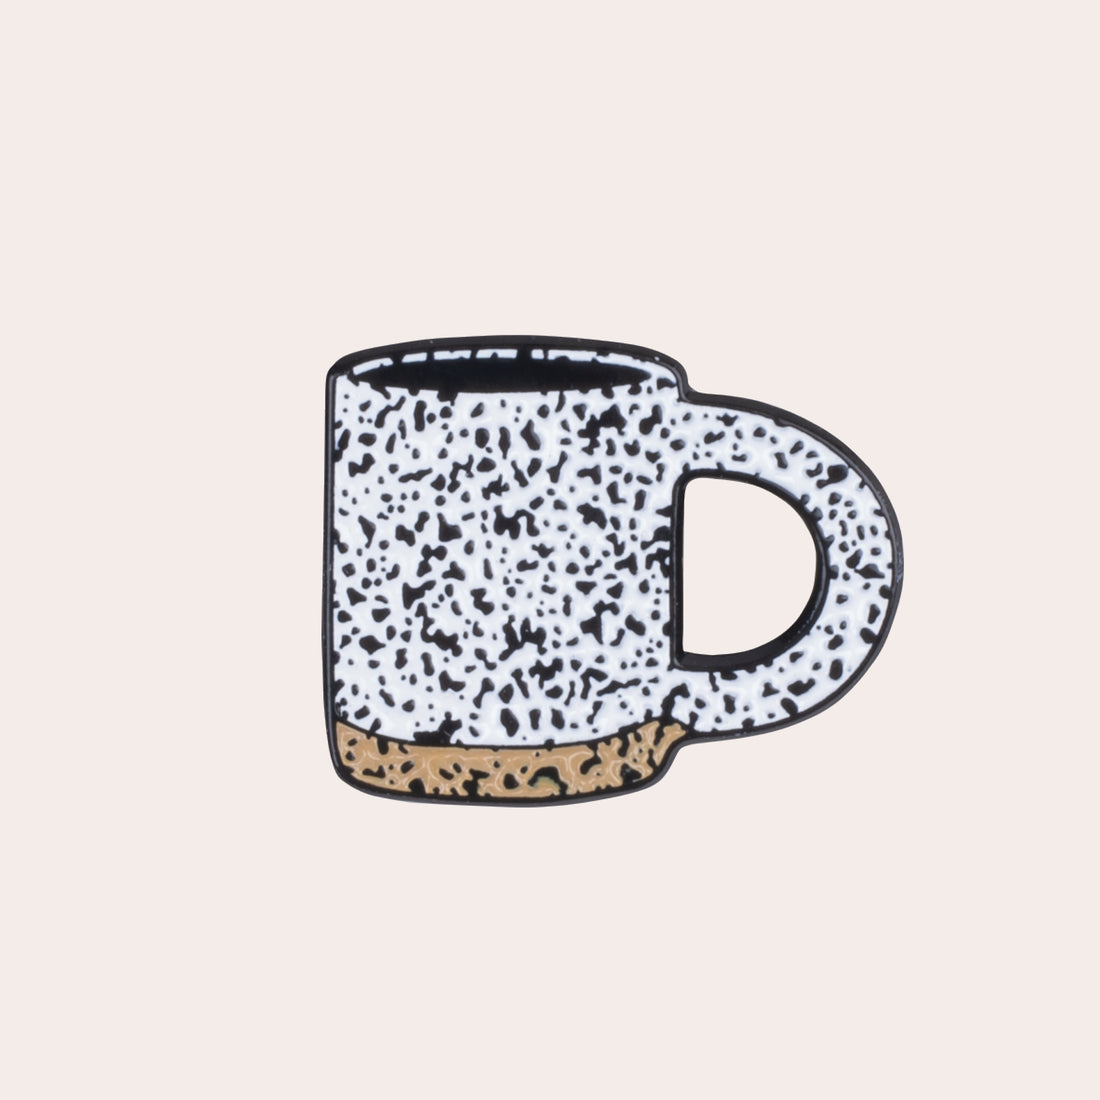 A soft enamel speckled mug pin with PVC rubber back.